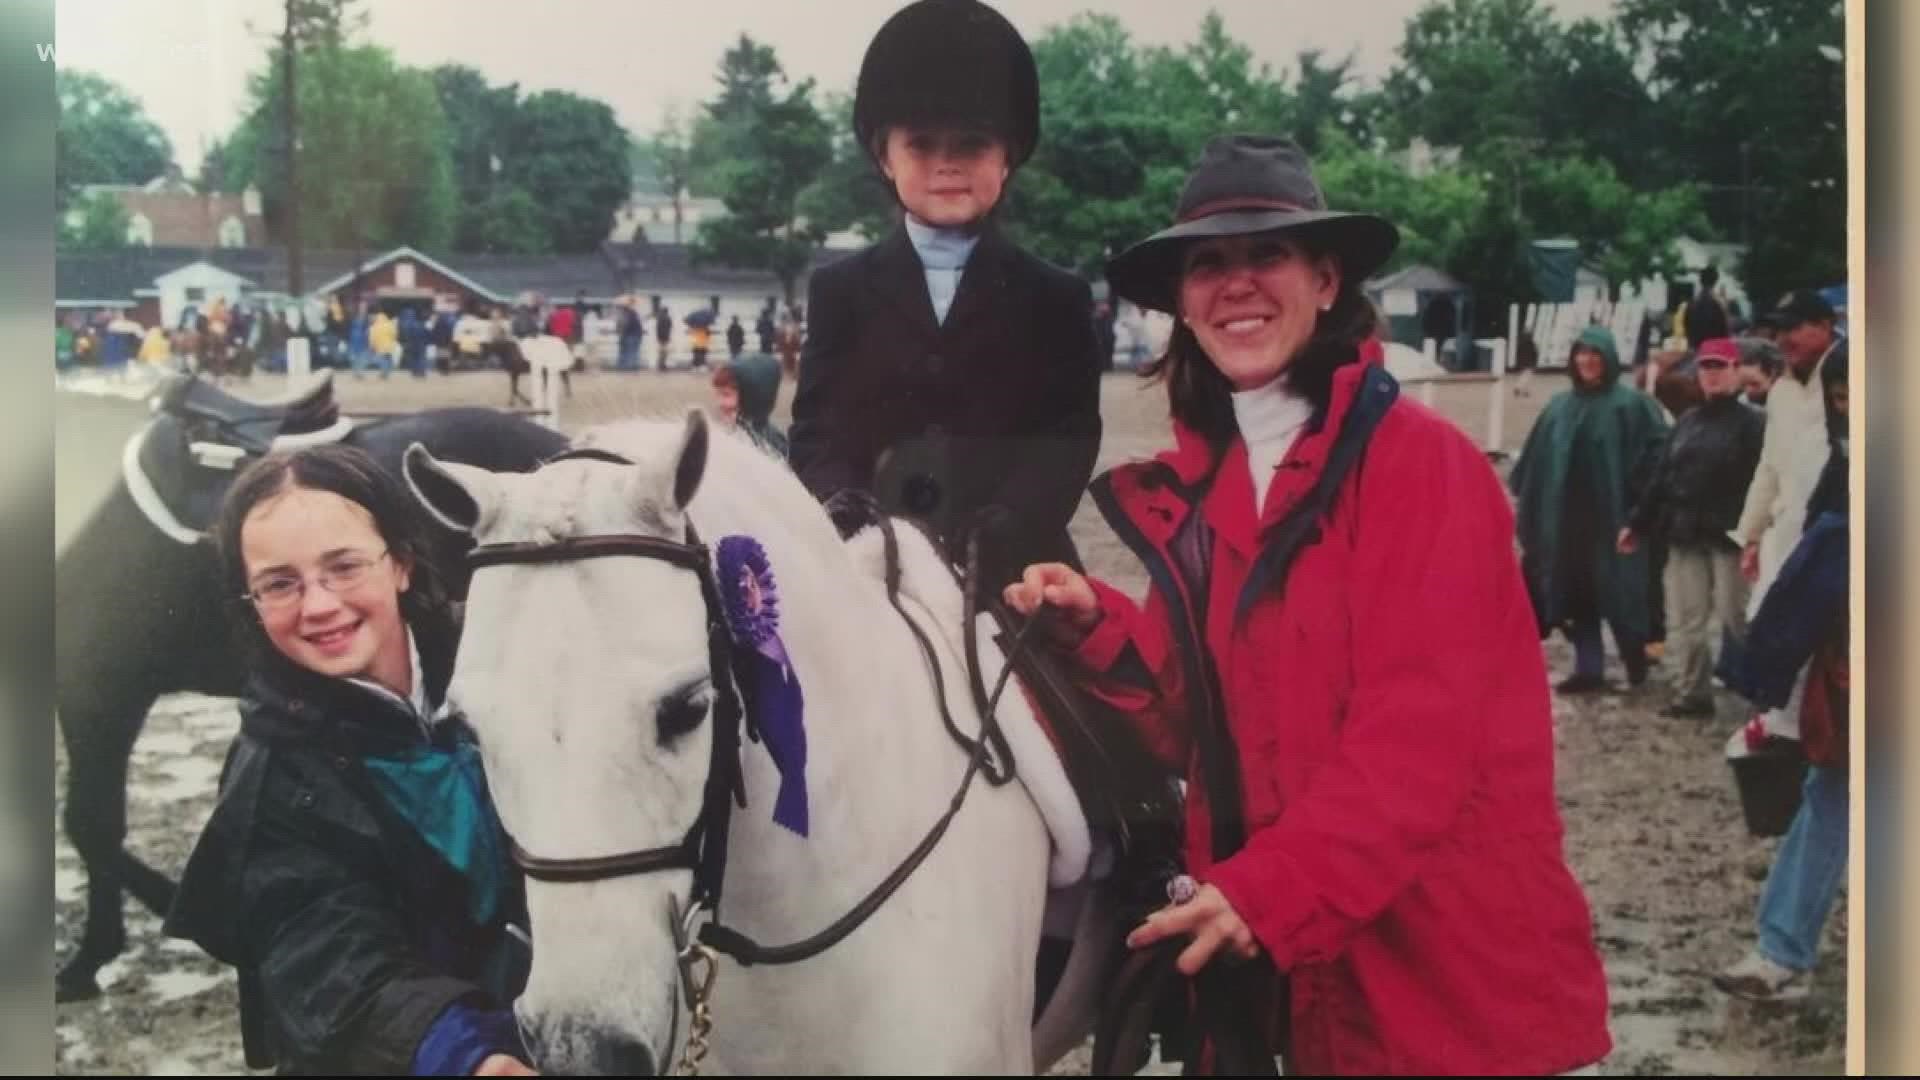 For Chloe Reid, competing at the Washington International Horse Show is a full-circle moment.